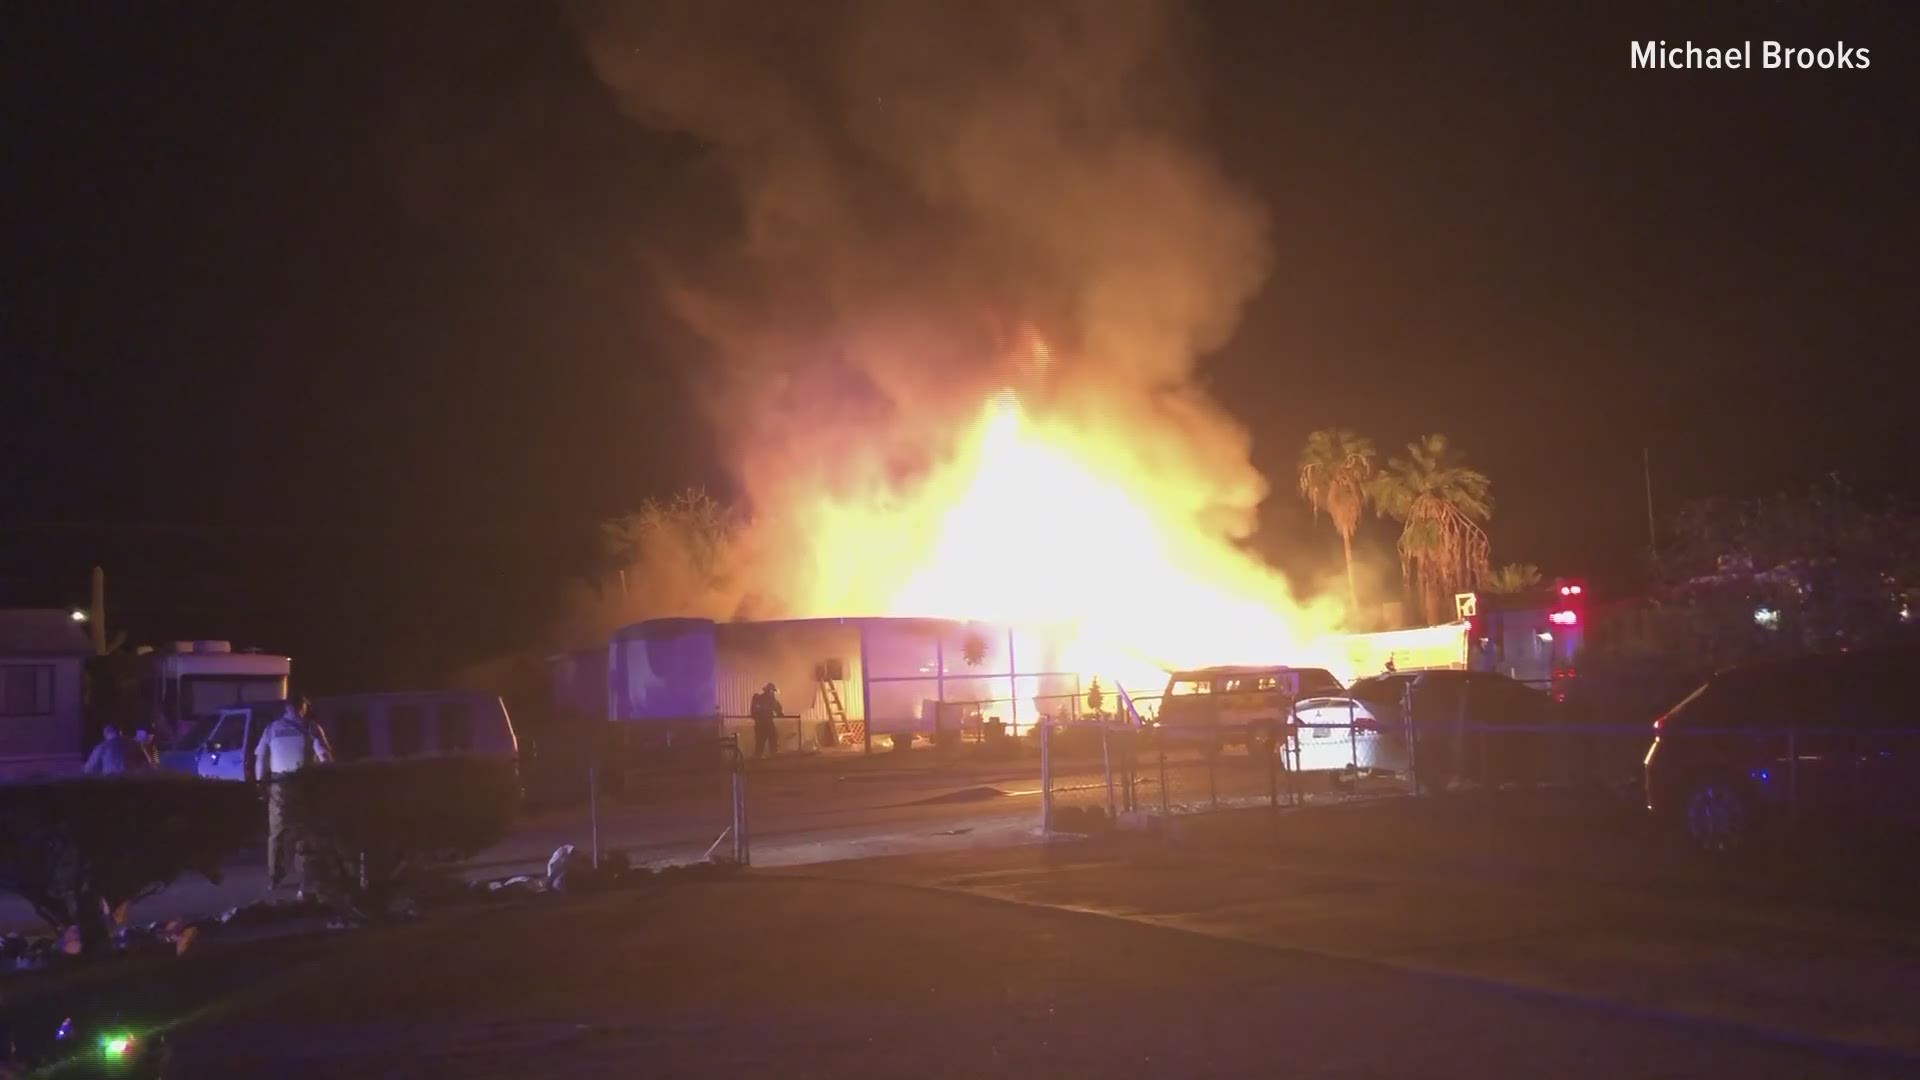 A woman was found dead after firefighters extinguished a fire that burned a mobile home in Apache Junction early Friday morning.